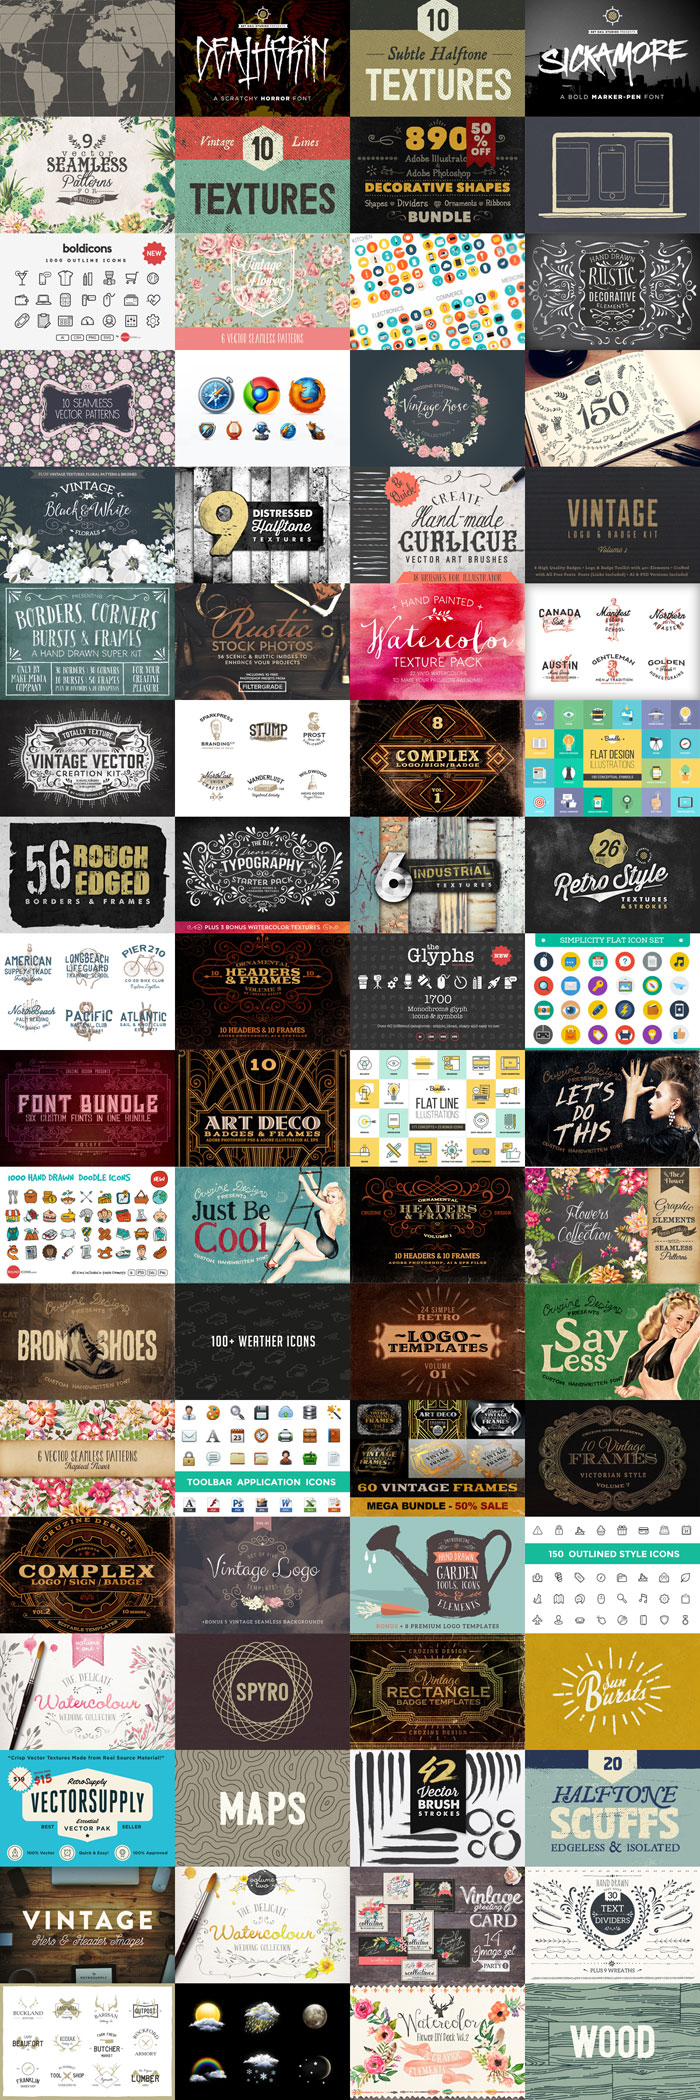 Download the Big Bundle Vol. 3 from Creative Market with lots of textures, brushes, vector graphics, vintage objects, icons, and many more amazing products.